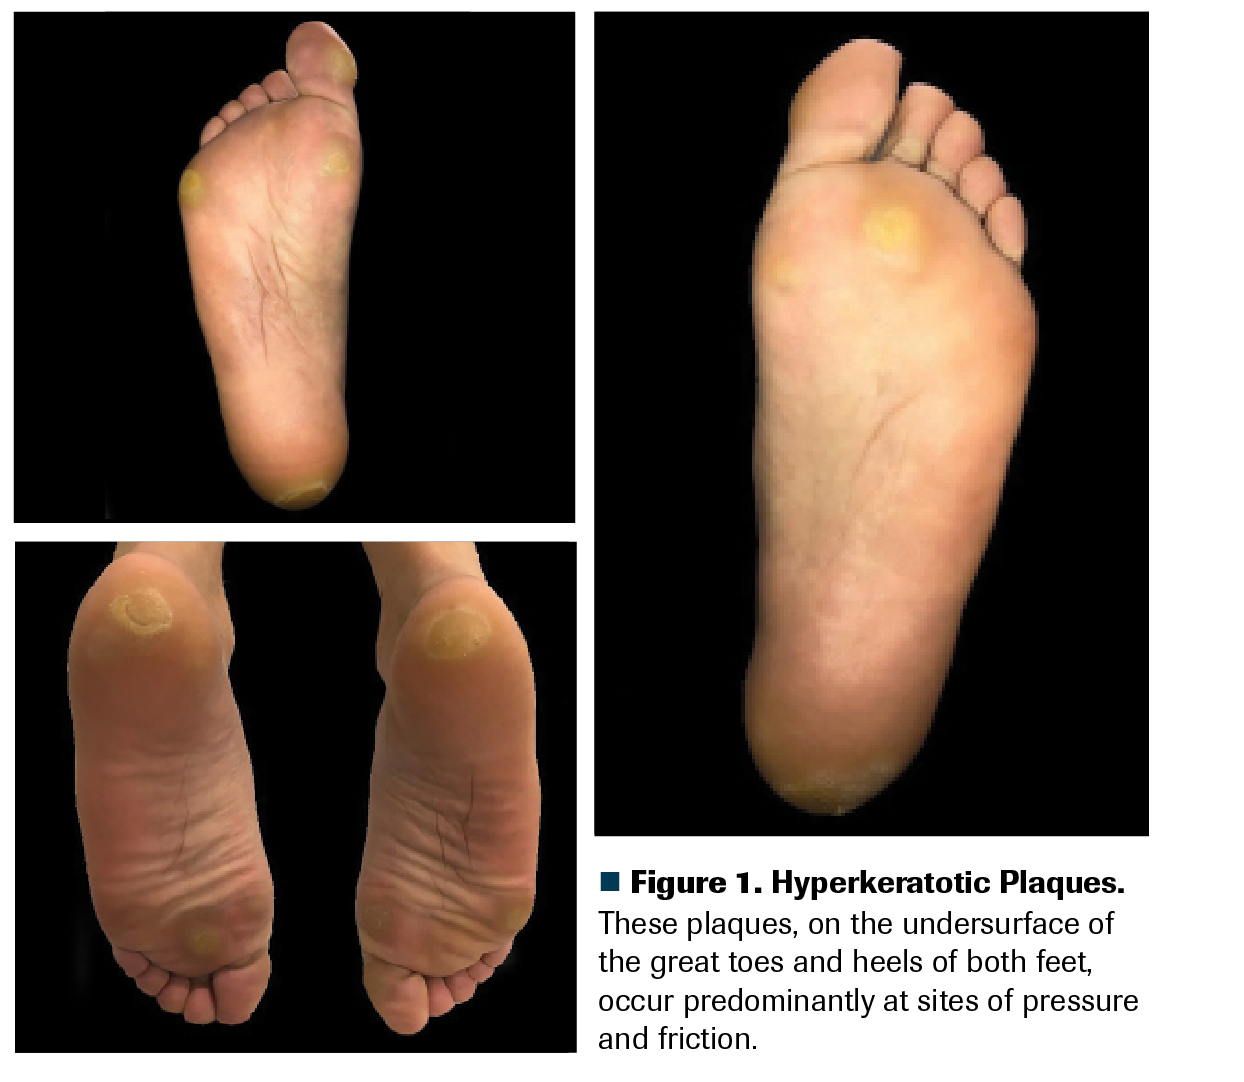 Figure 1. Hyperkeratotic Plaques. These plaques, on the undersurface of the great toes and heels of both feet, occur predominantly at sites of pressure and friction.